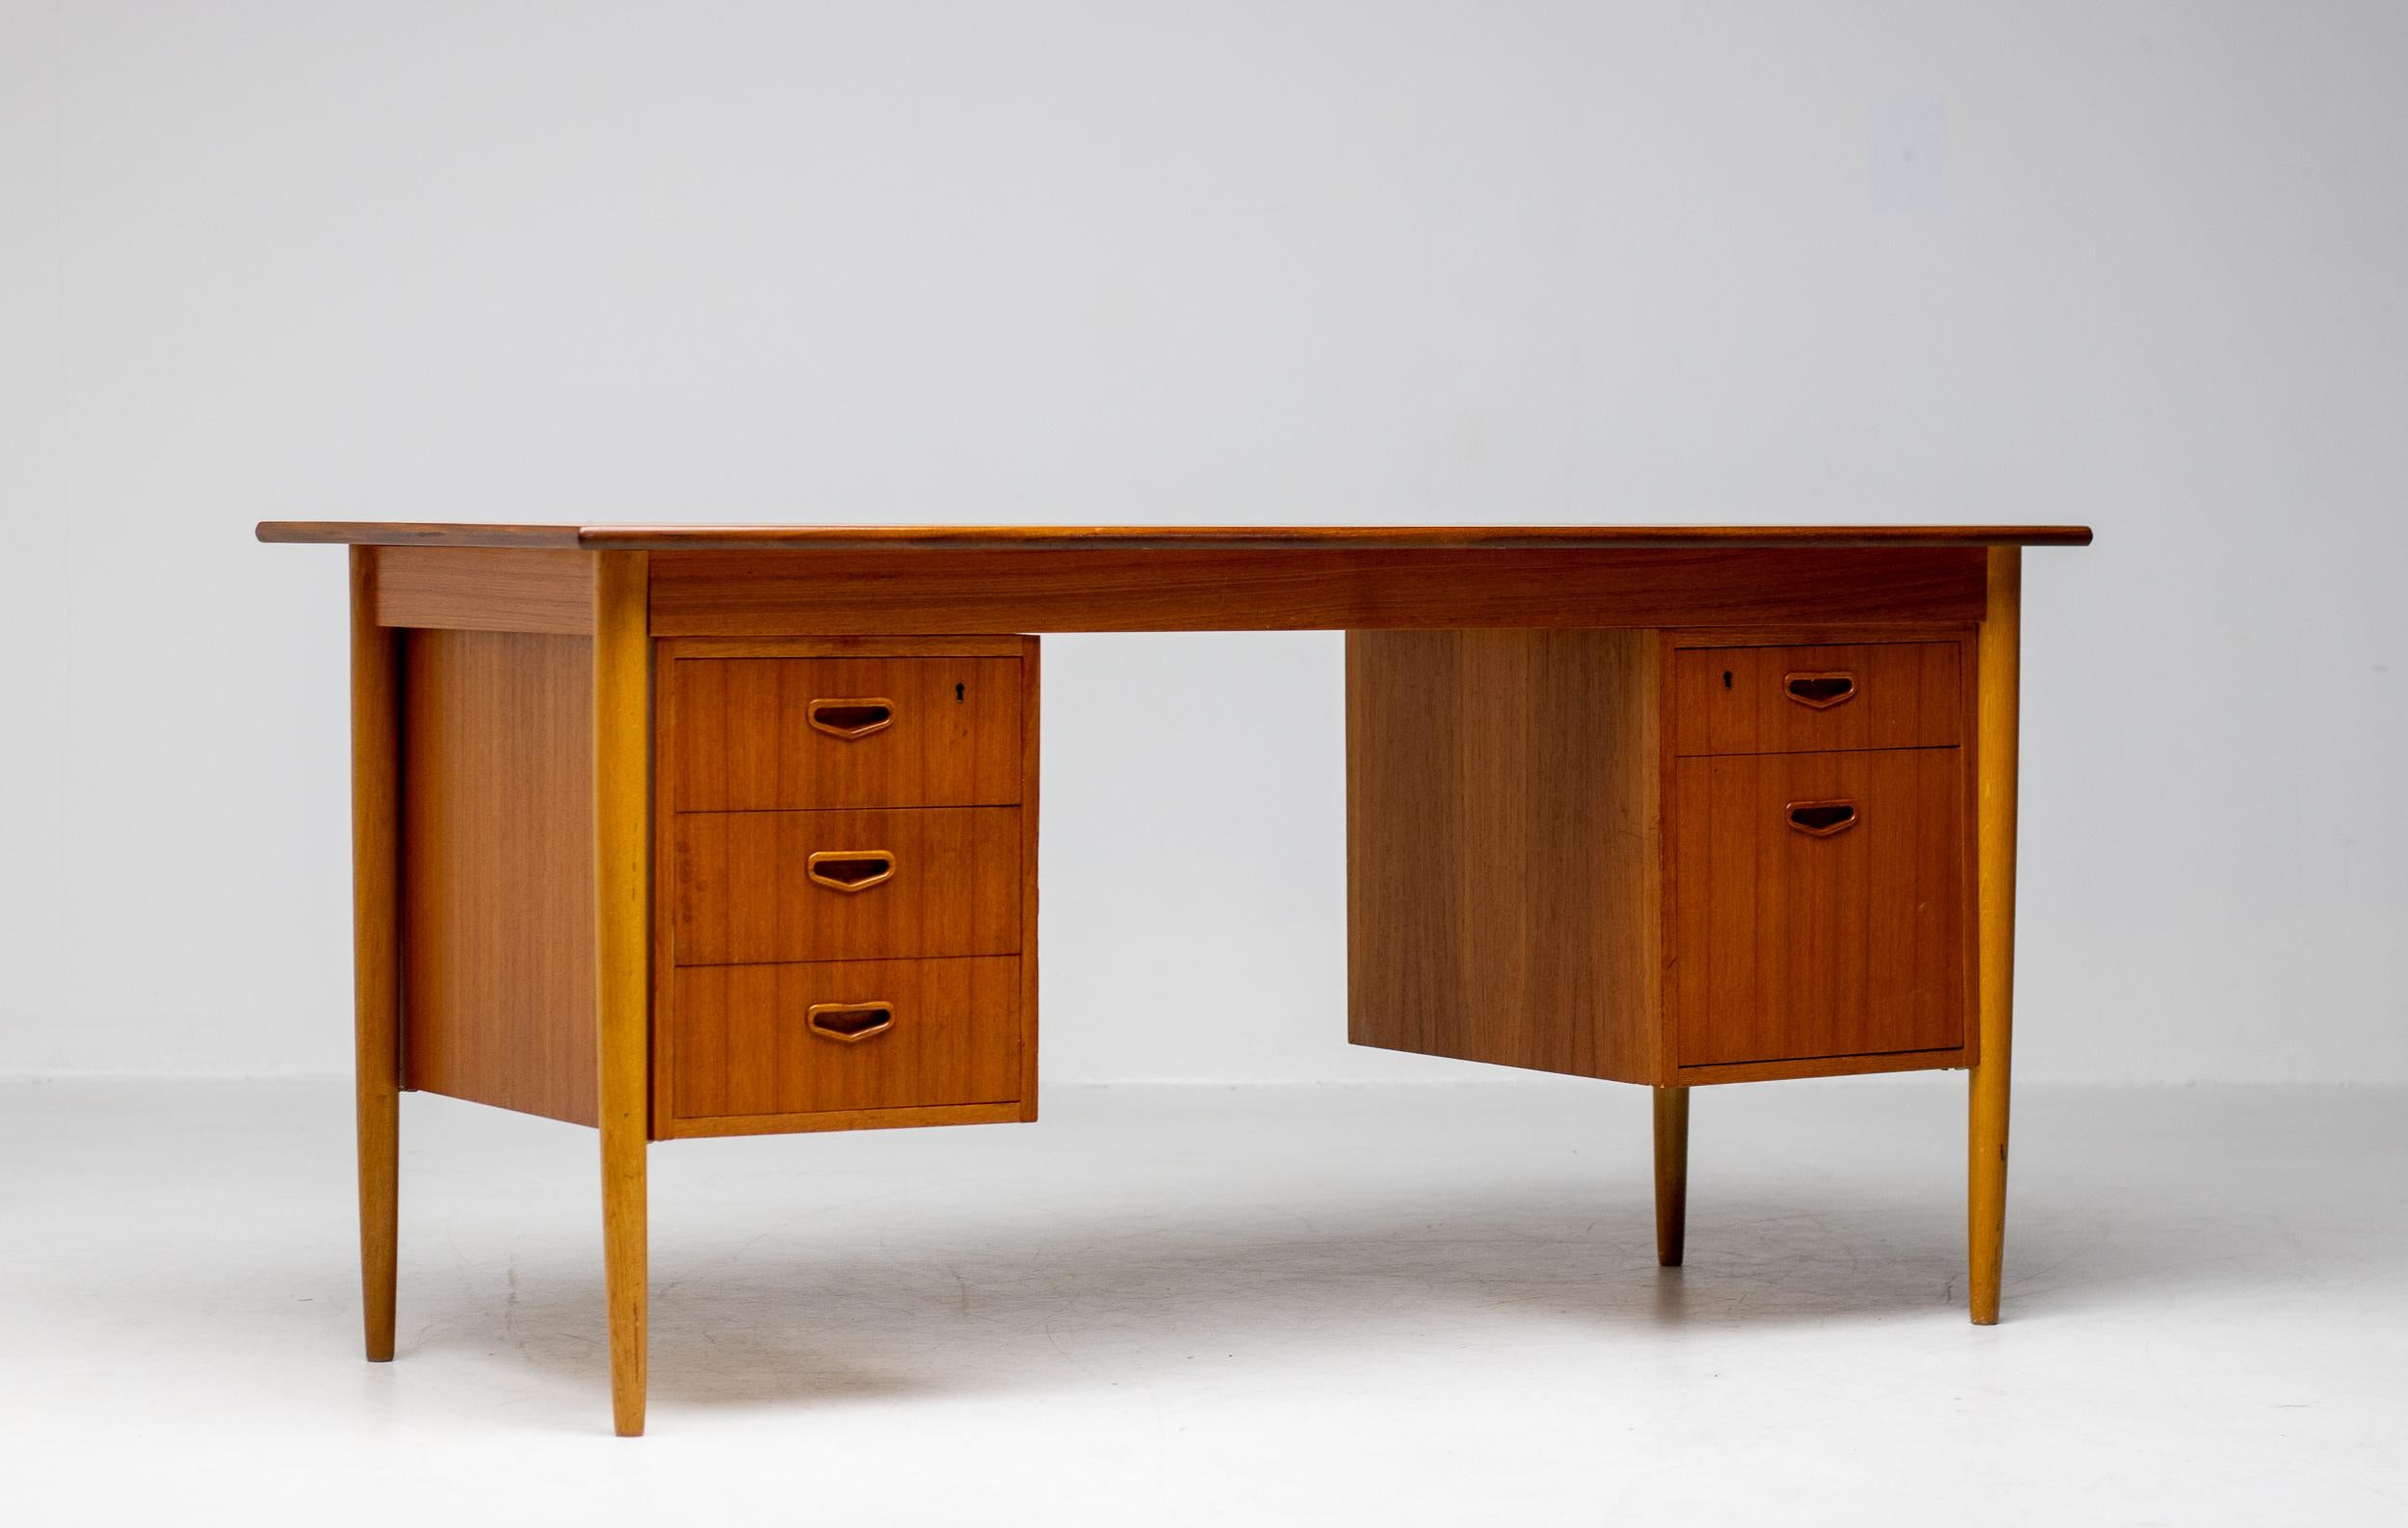 Mid-Century Danish Modern teak desk with bookcase front. Three drawers on the left and two drawers on the right. This desk was acquired from the original owner who purchased it in the 1960s. 
It is in amazingly good completely original condition.